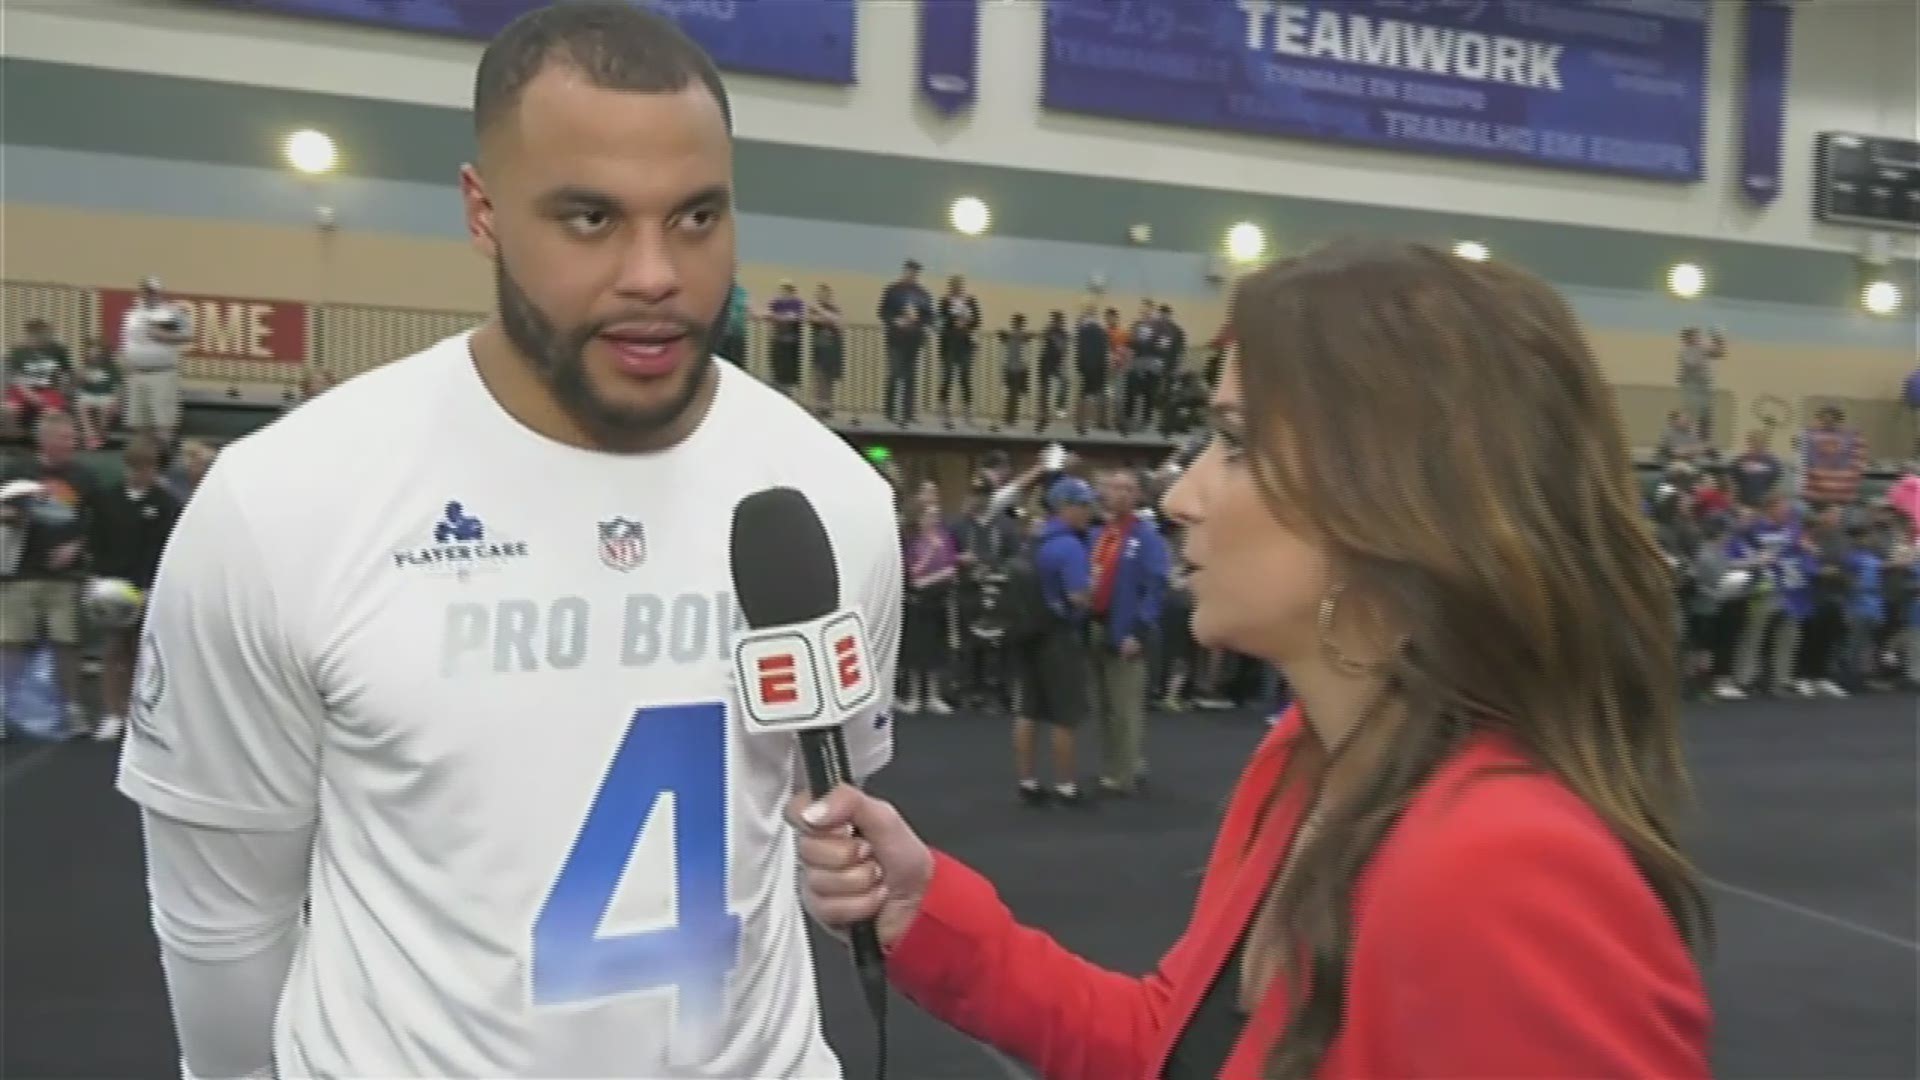 Dak Prescott weighs in on his 2018-19 season ahead of his second Pro Bowl appearance.